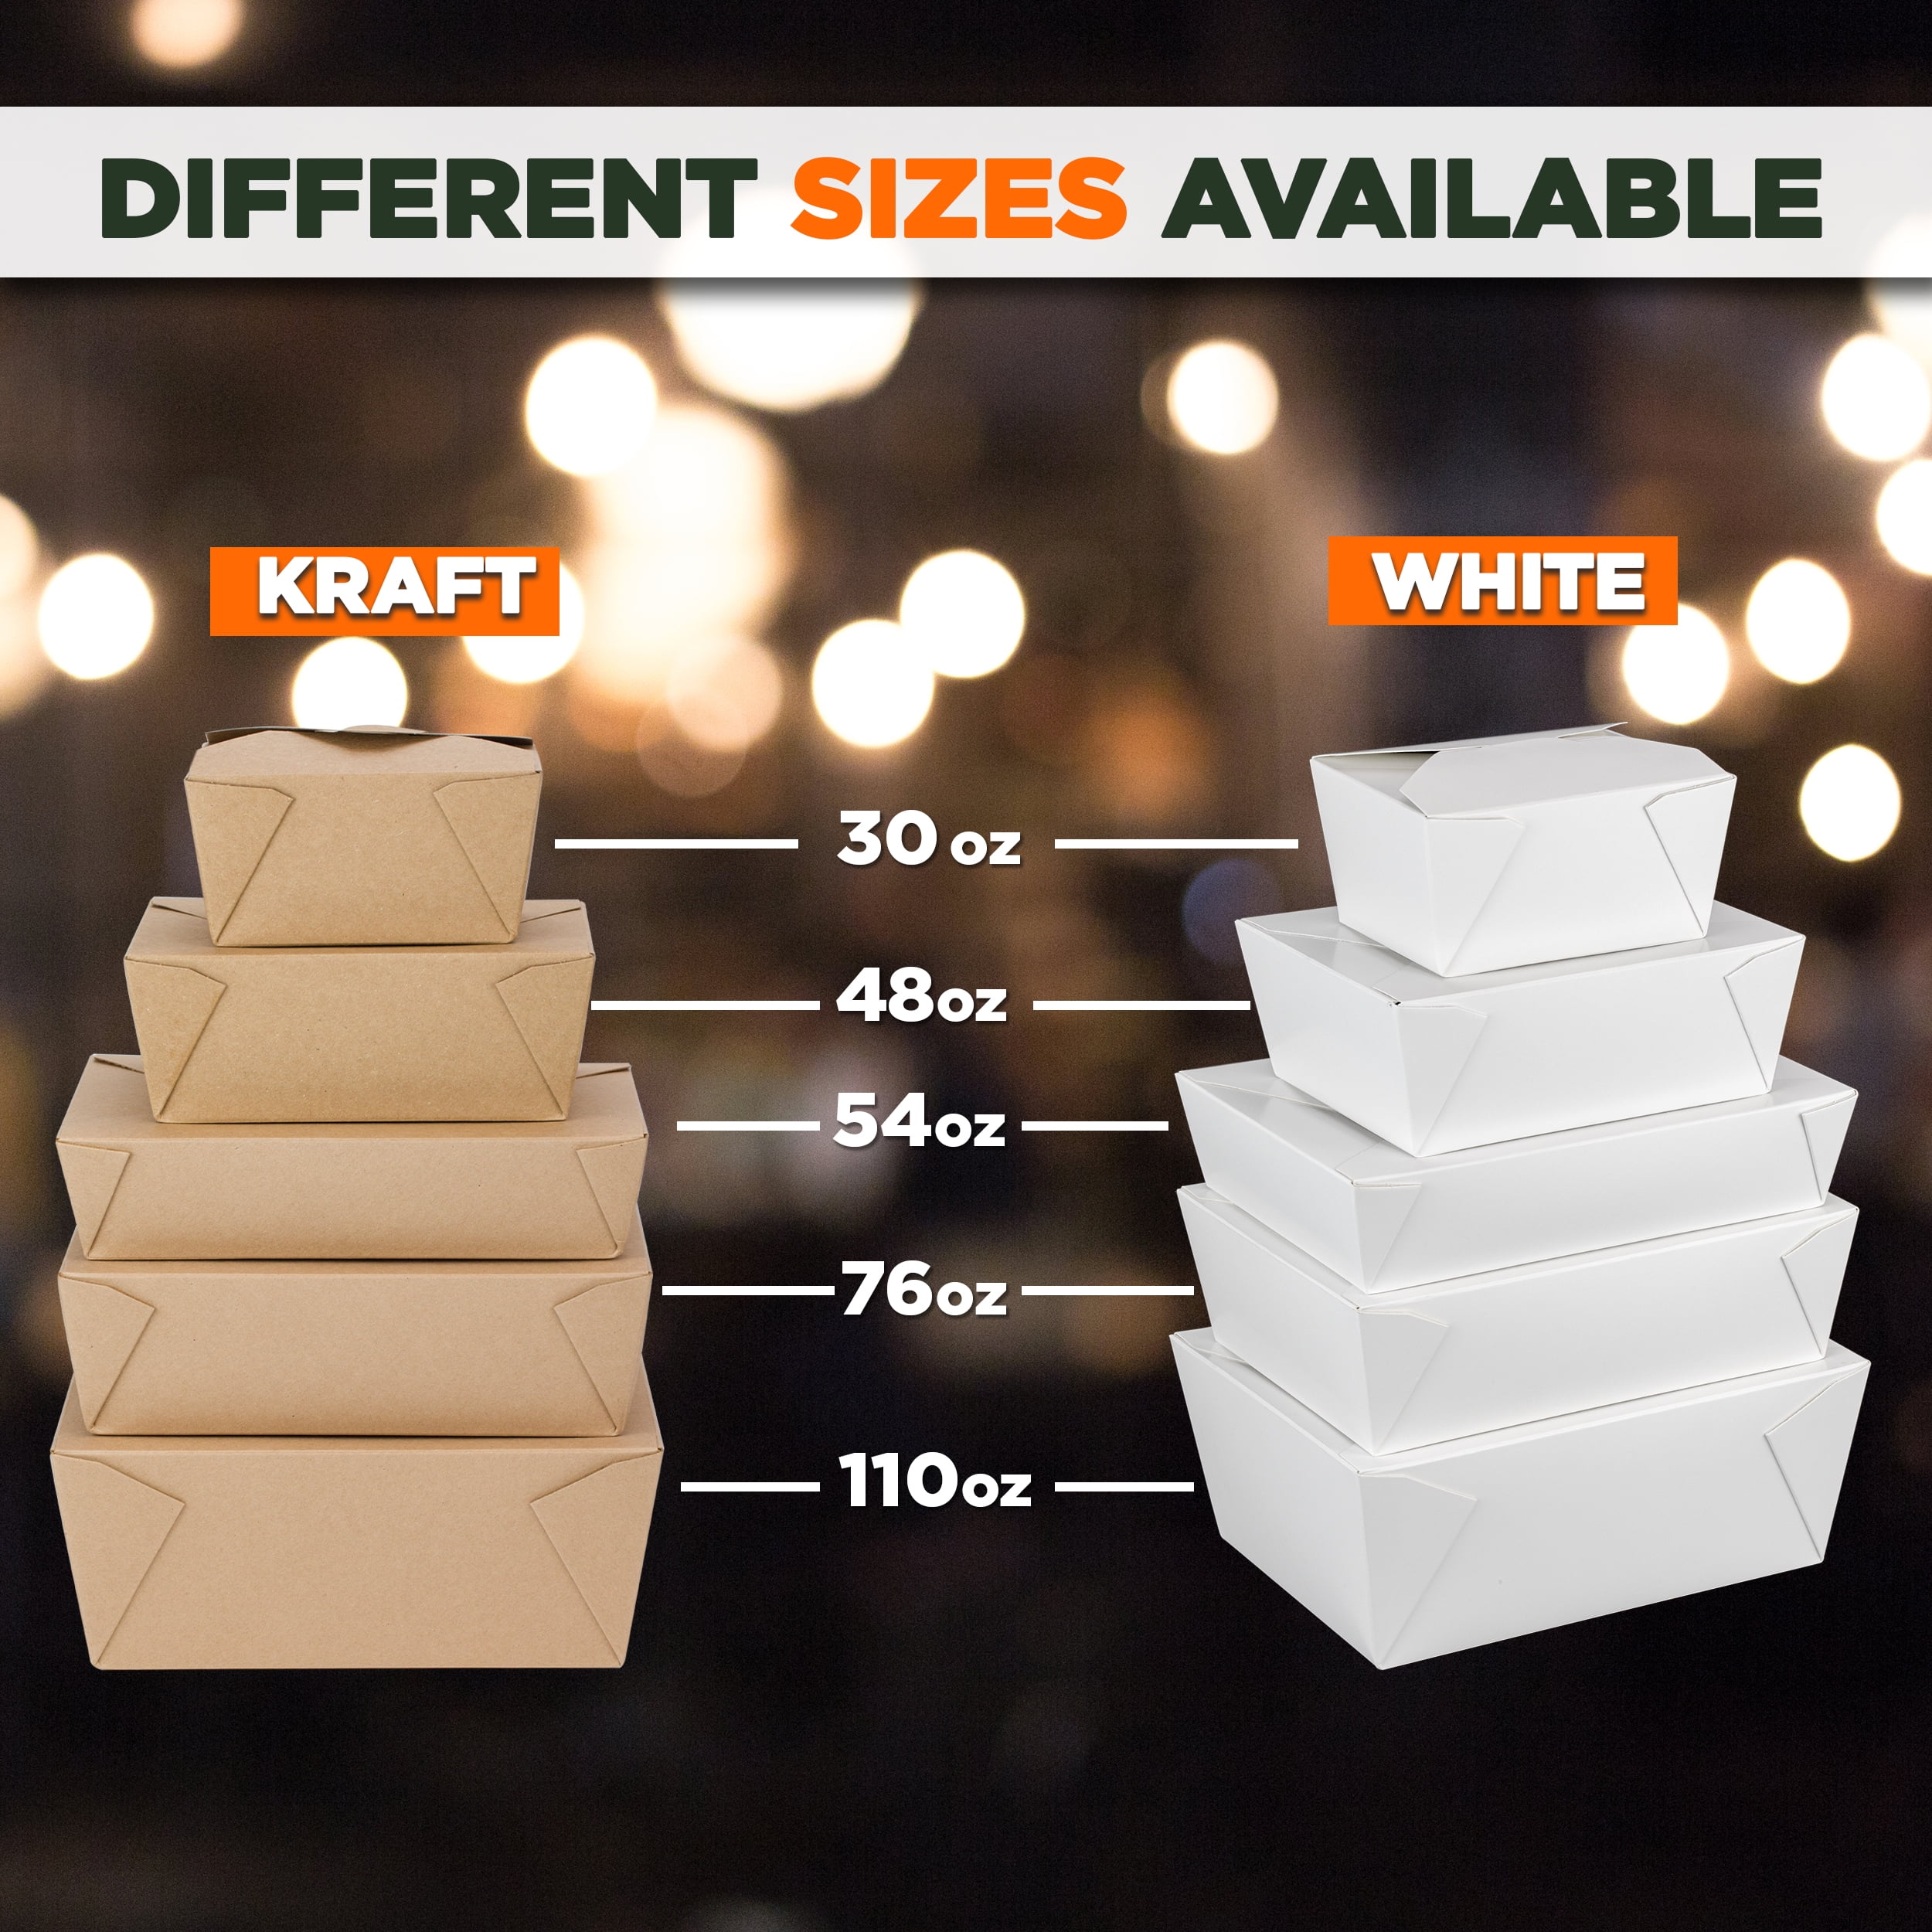 White Microwavable Folded Paper #1 Takeout Boxes - Karat Small Fold-To-Go  Container - 30oz - 4.3